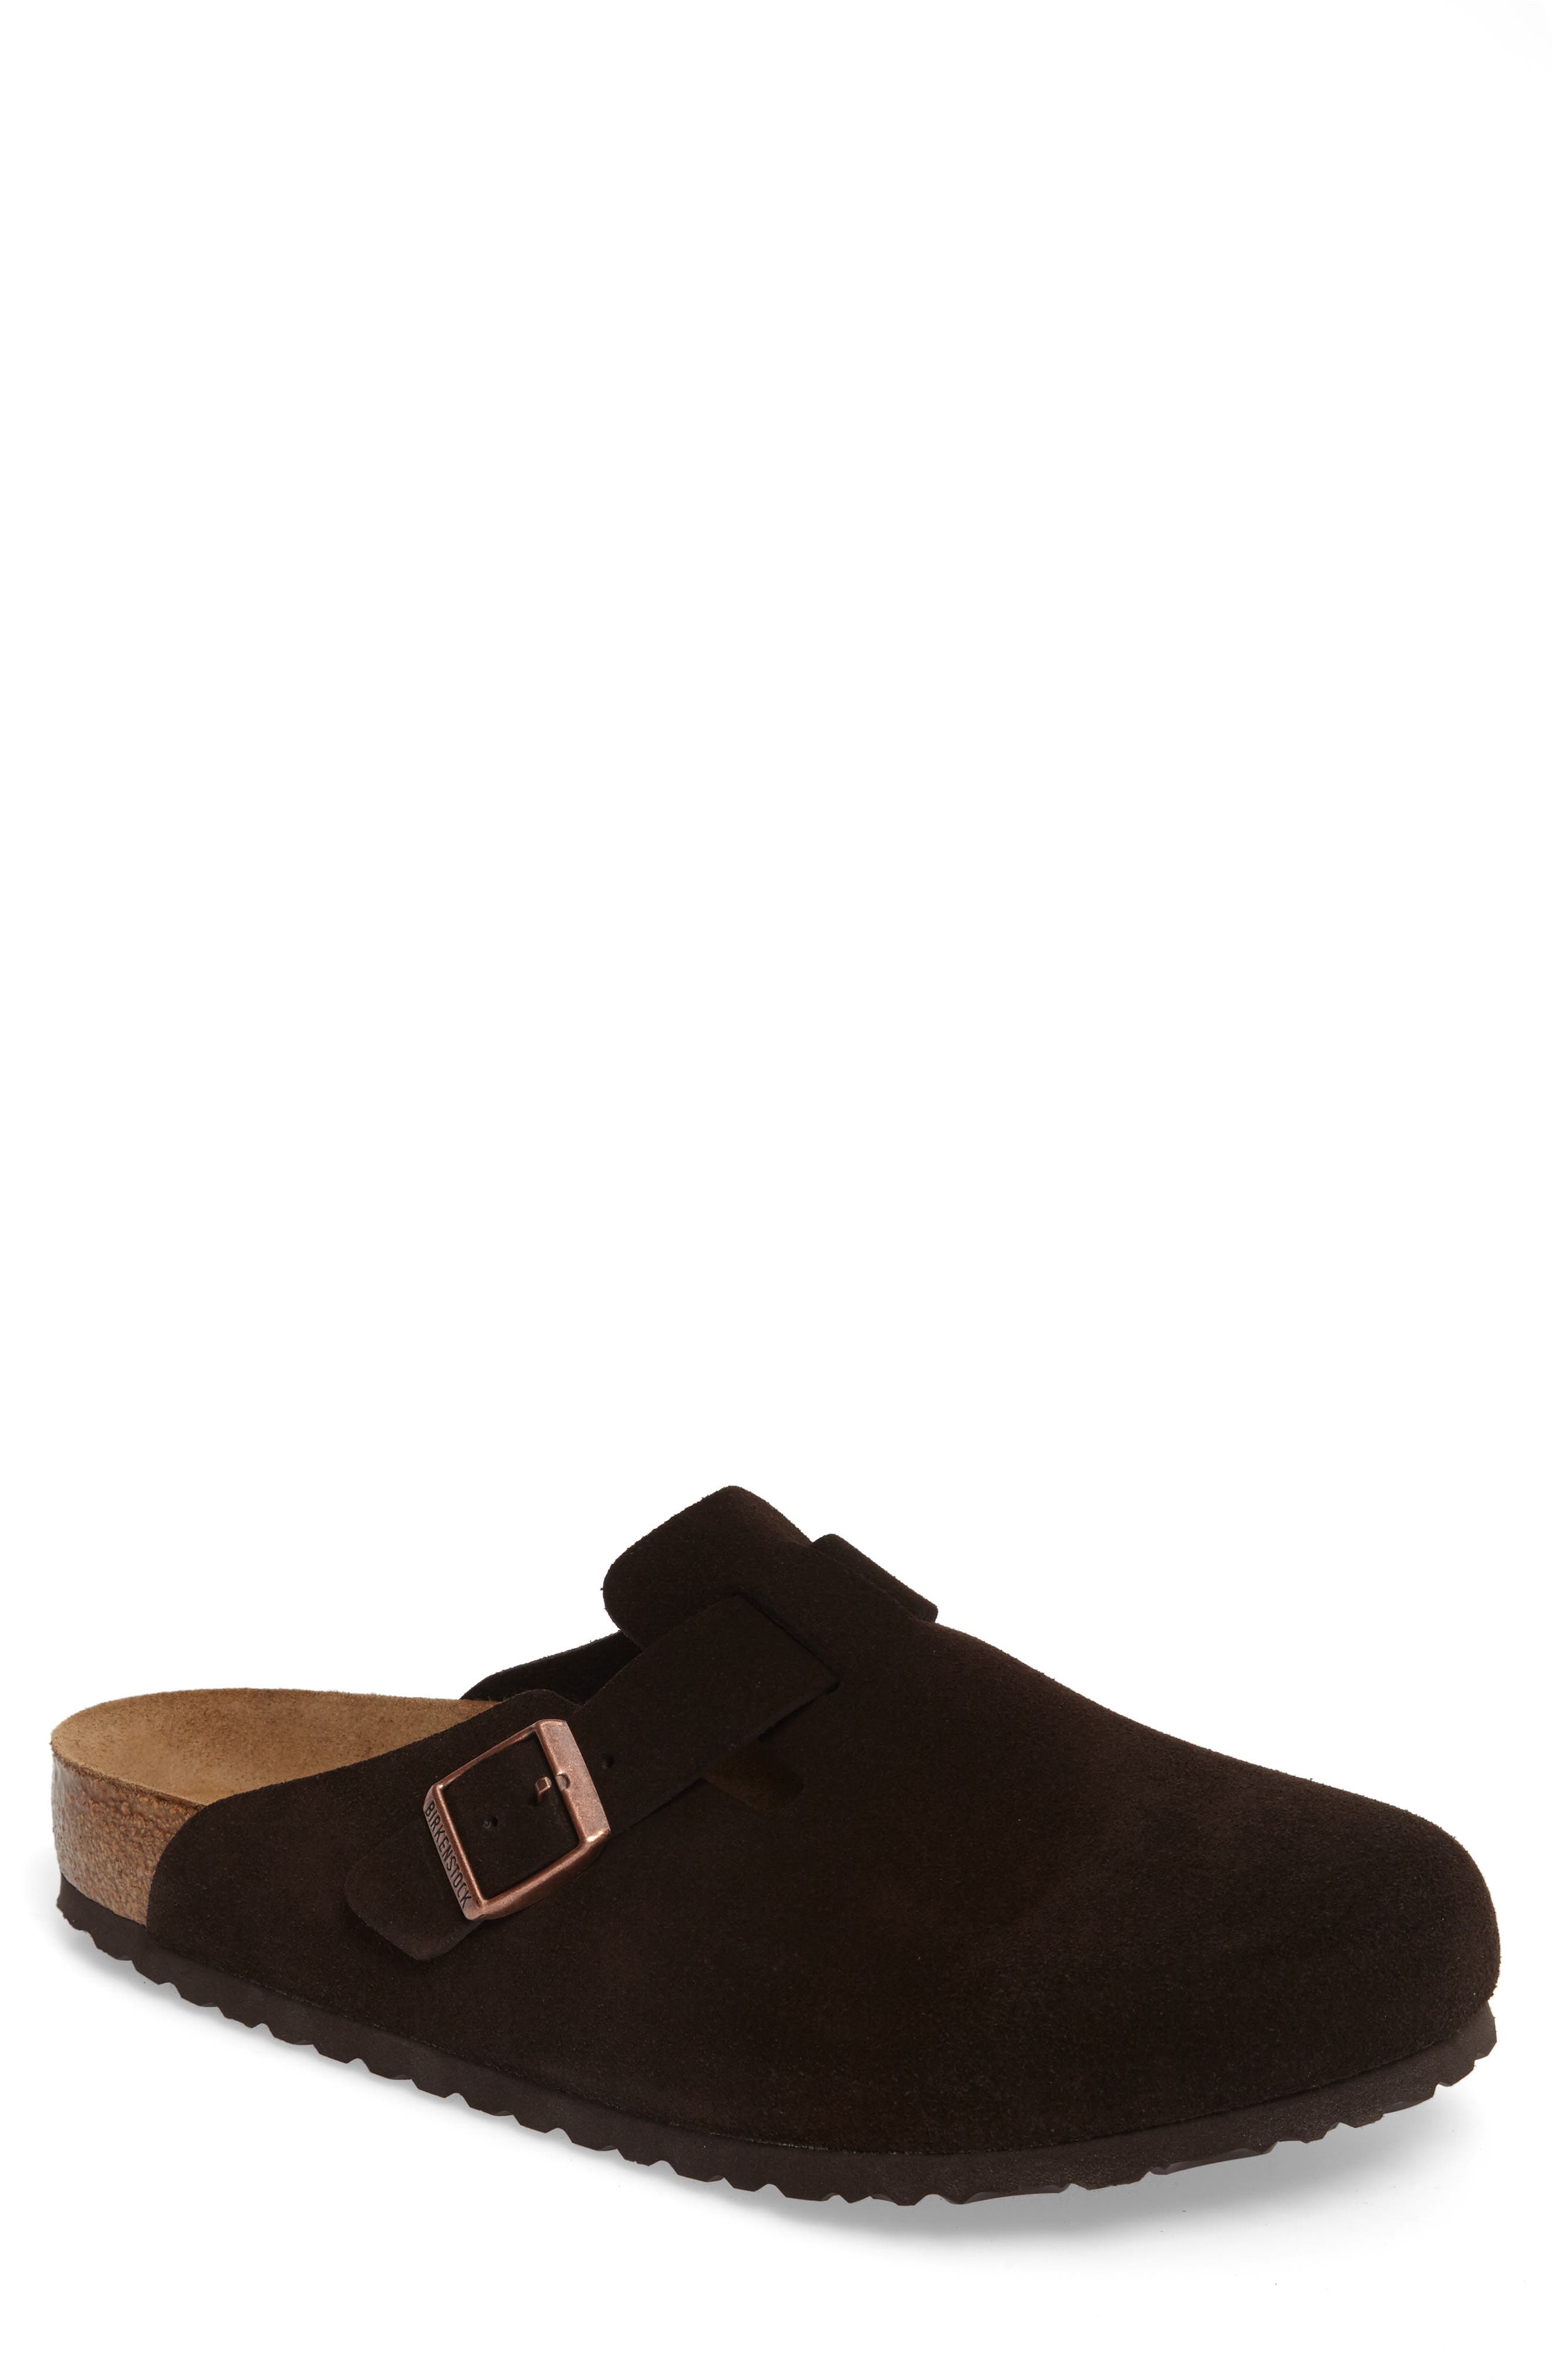 Birkenstock - Men's Classic Casual Footwear . Sustainable fashion and ...